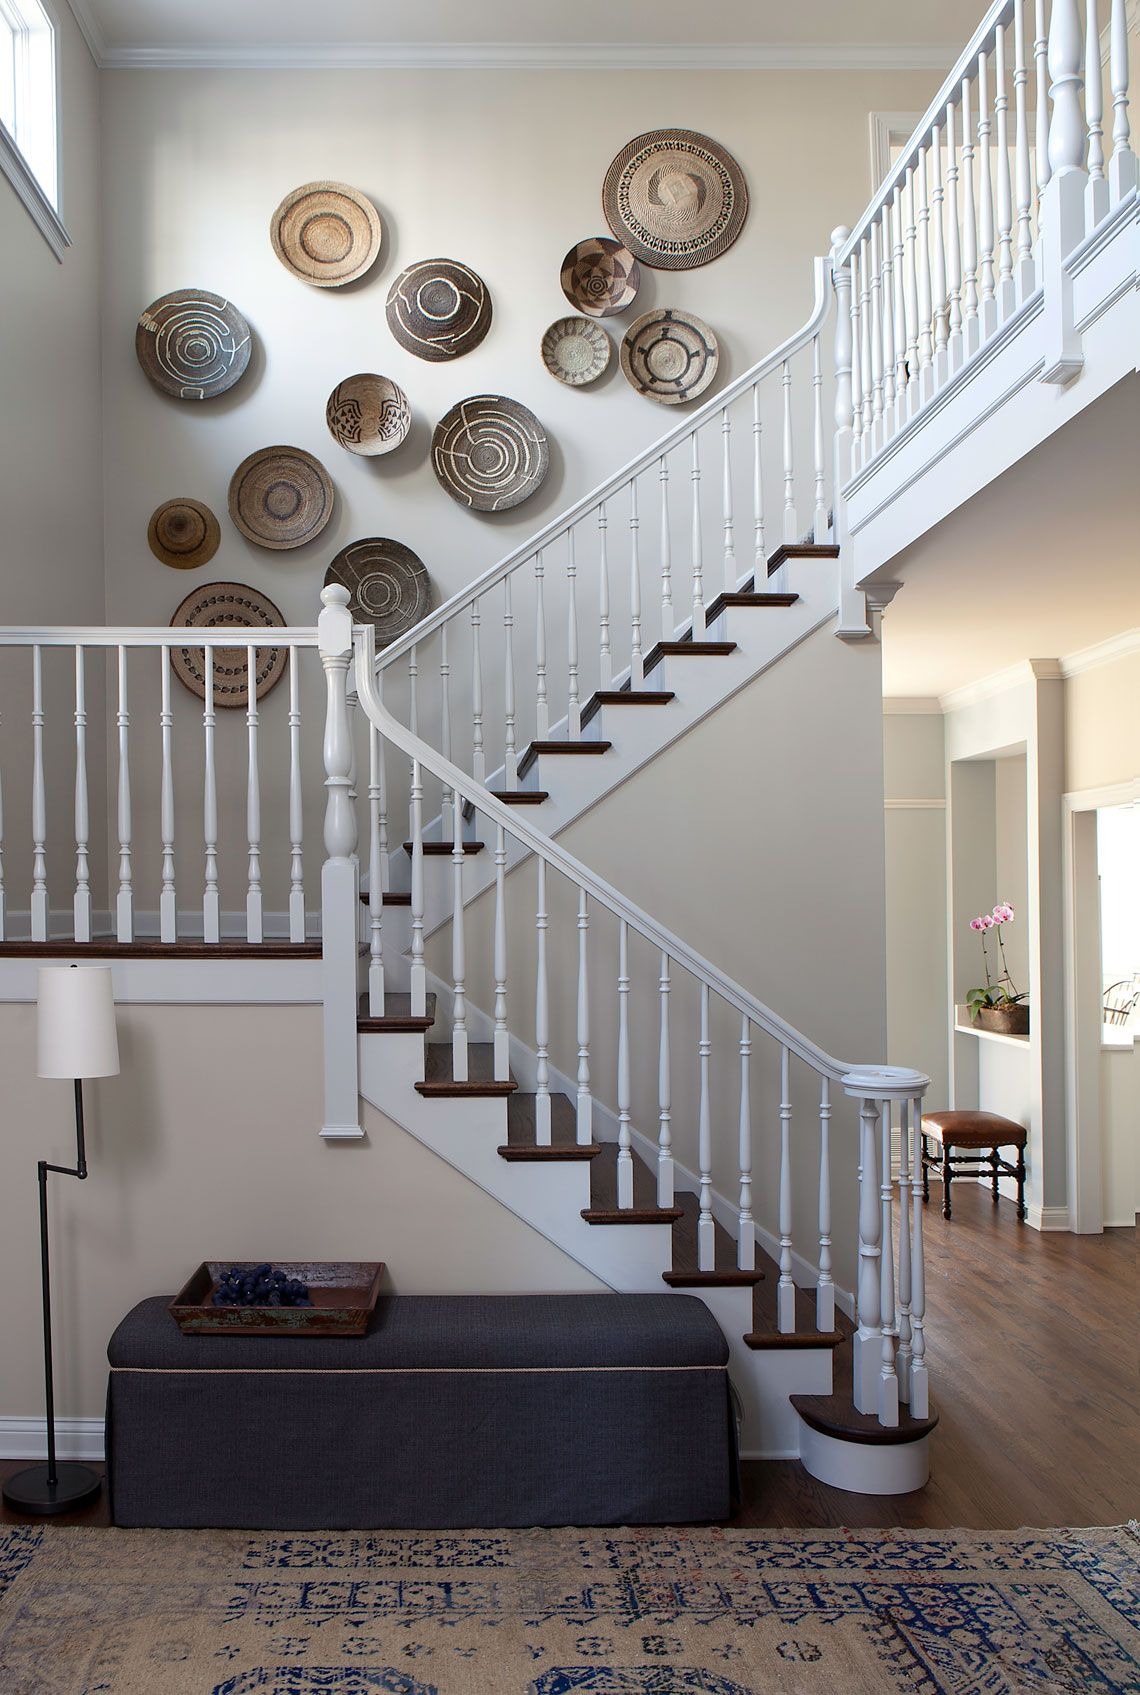 Decorating with Baskets as Art